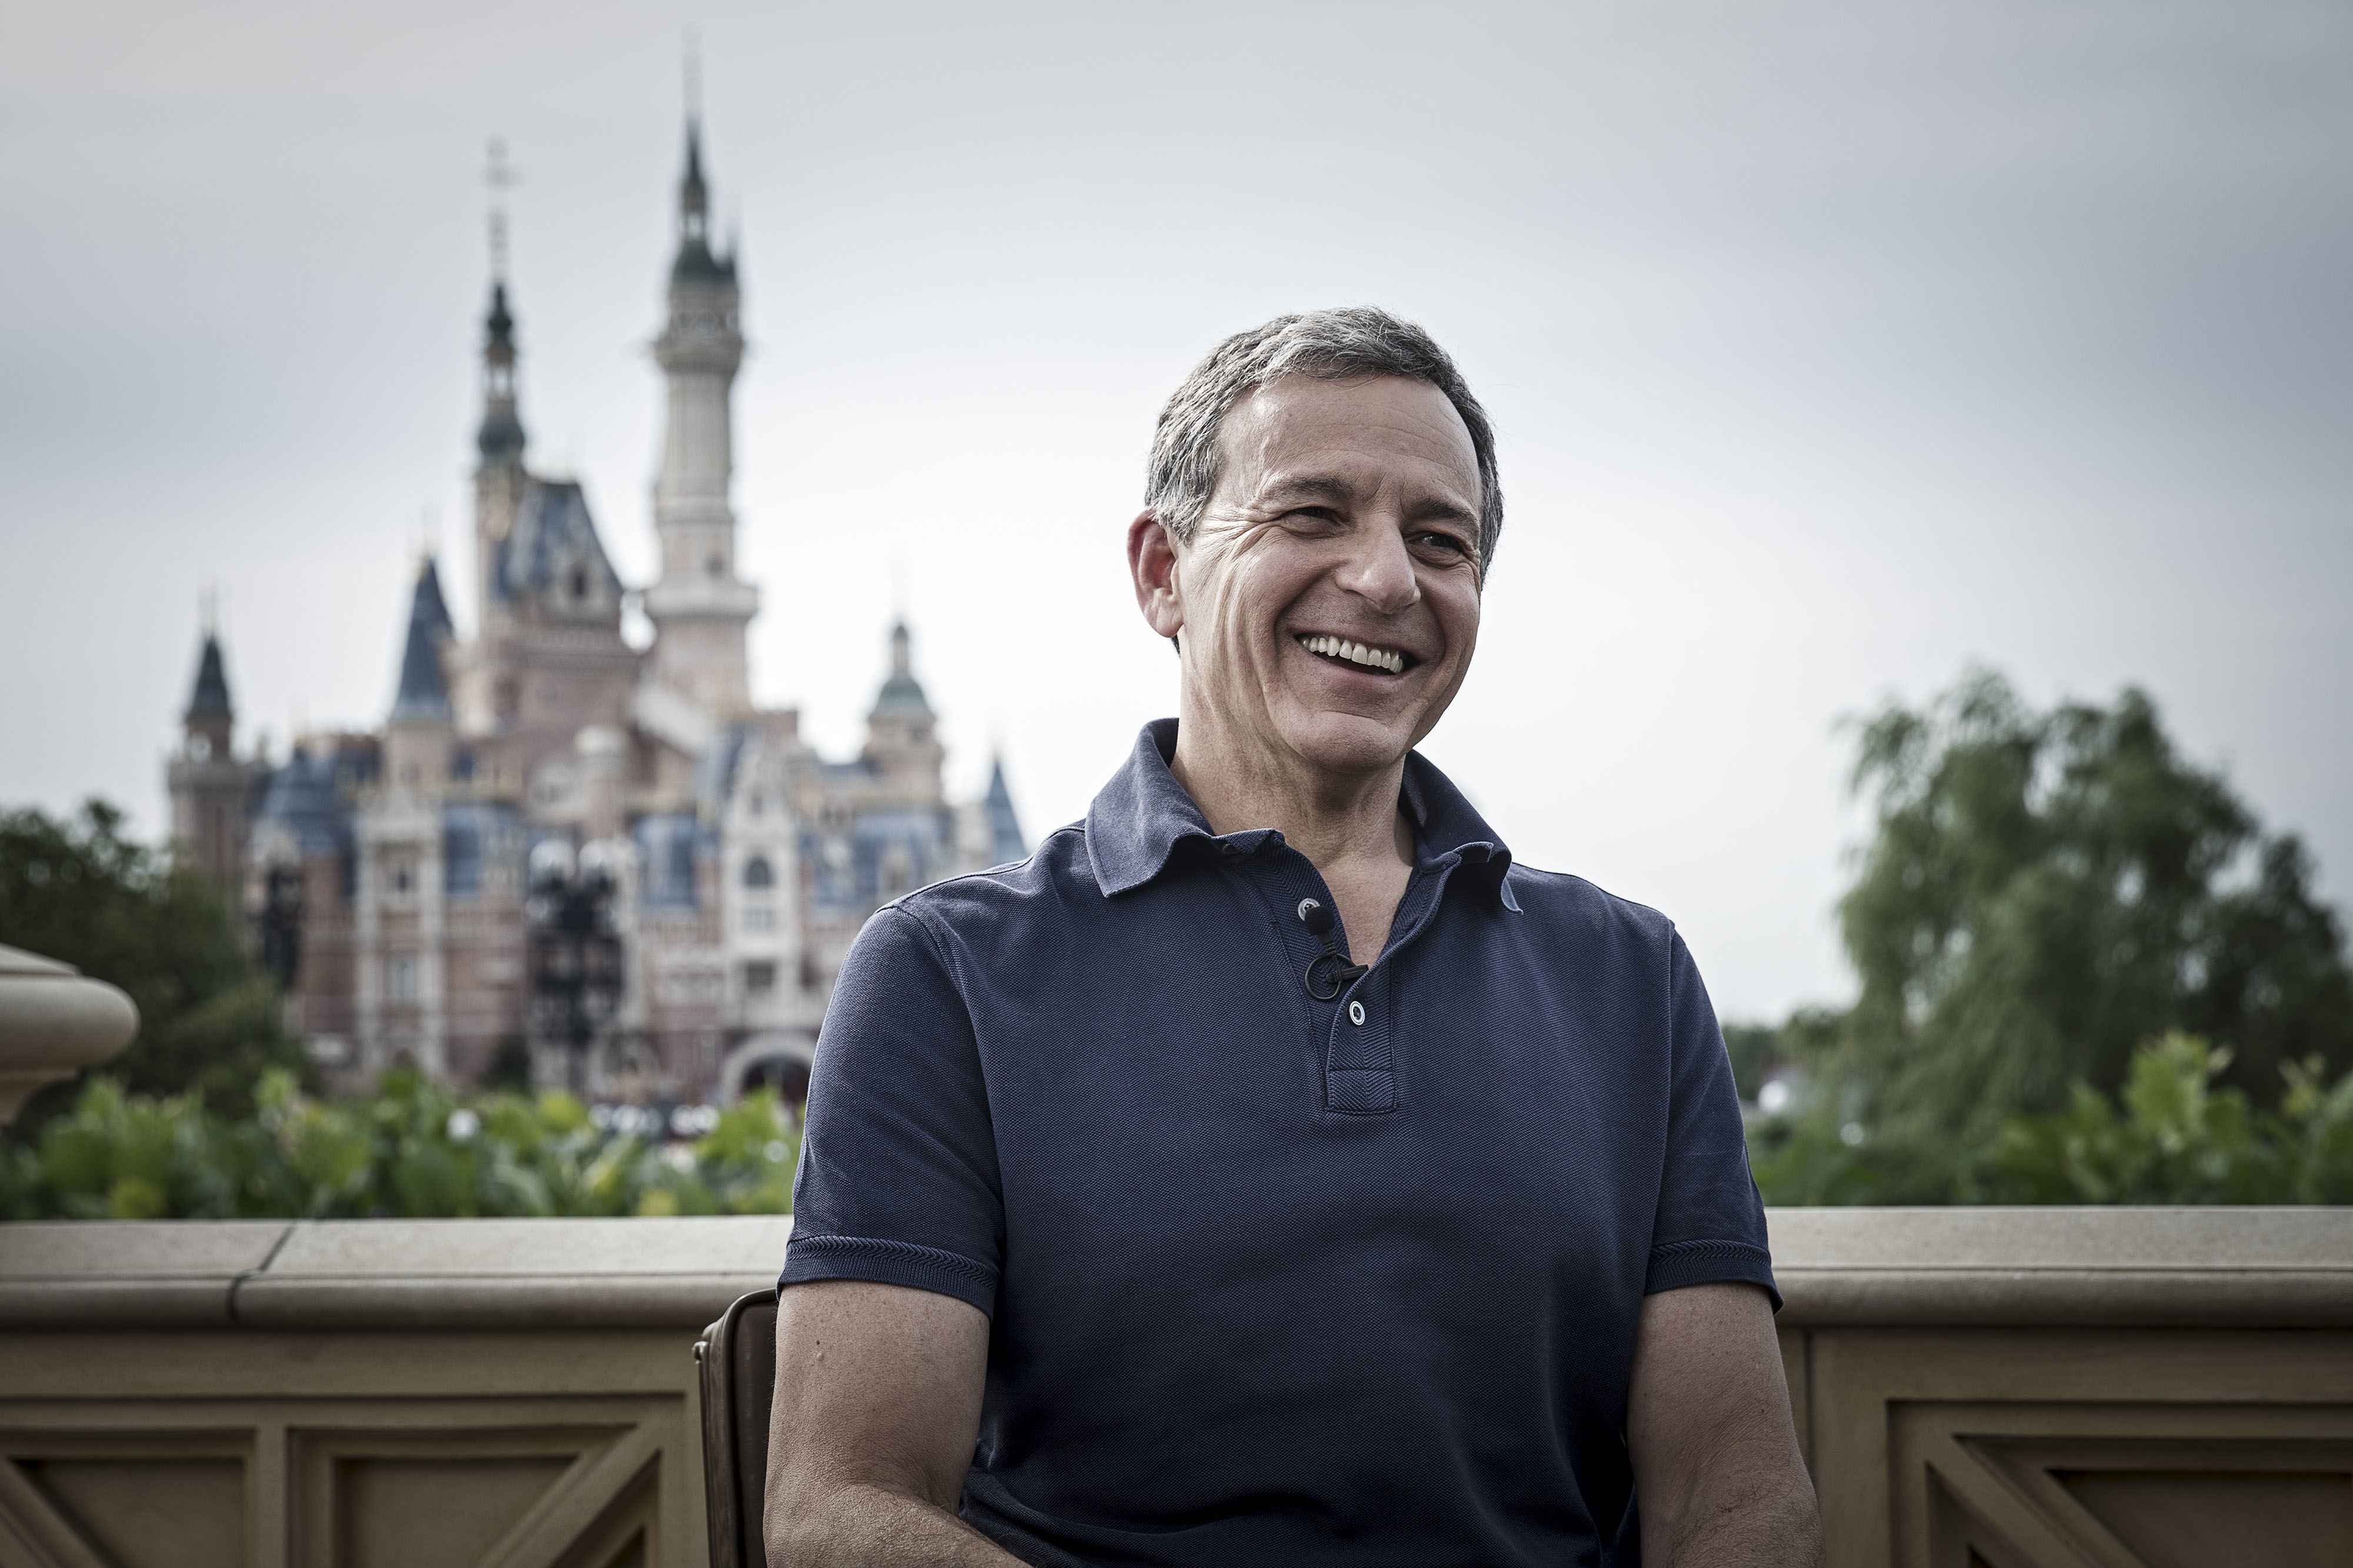 Theme Park News: Bob Iger steps up, workers get furloughed, more coronavirus updates | SYFY WIRE